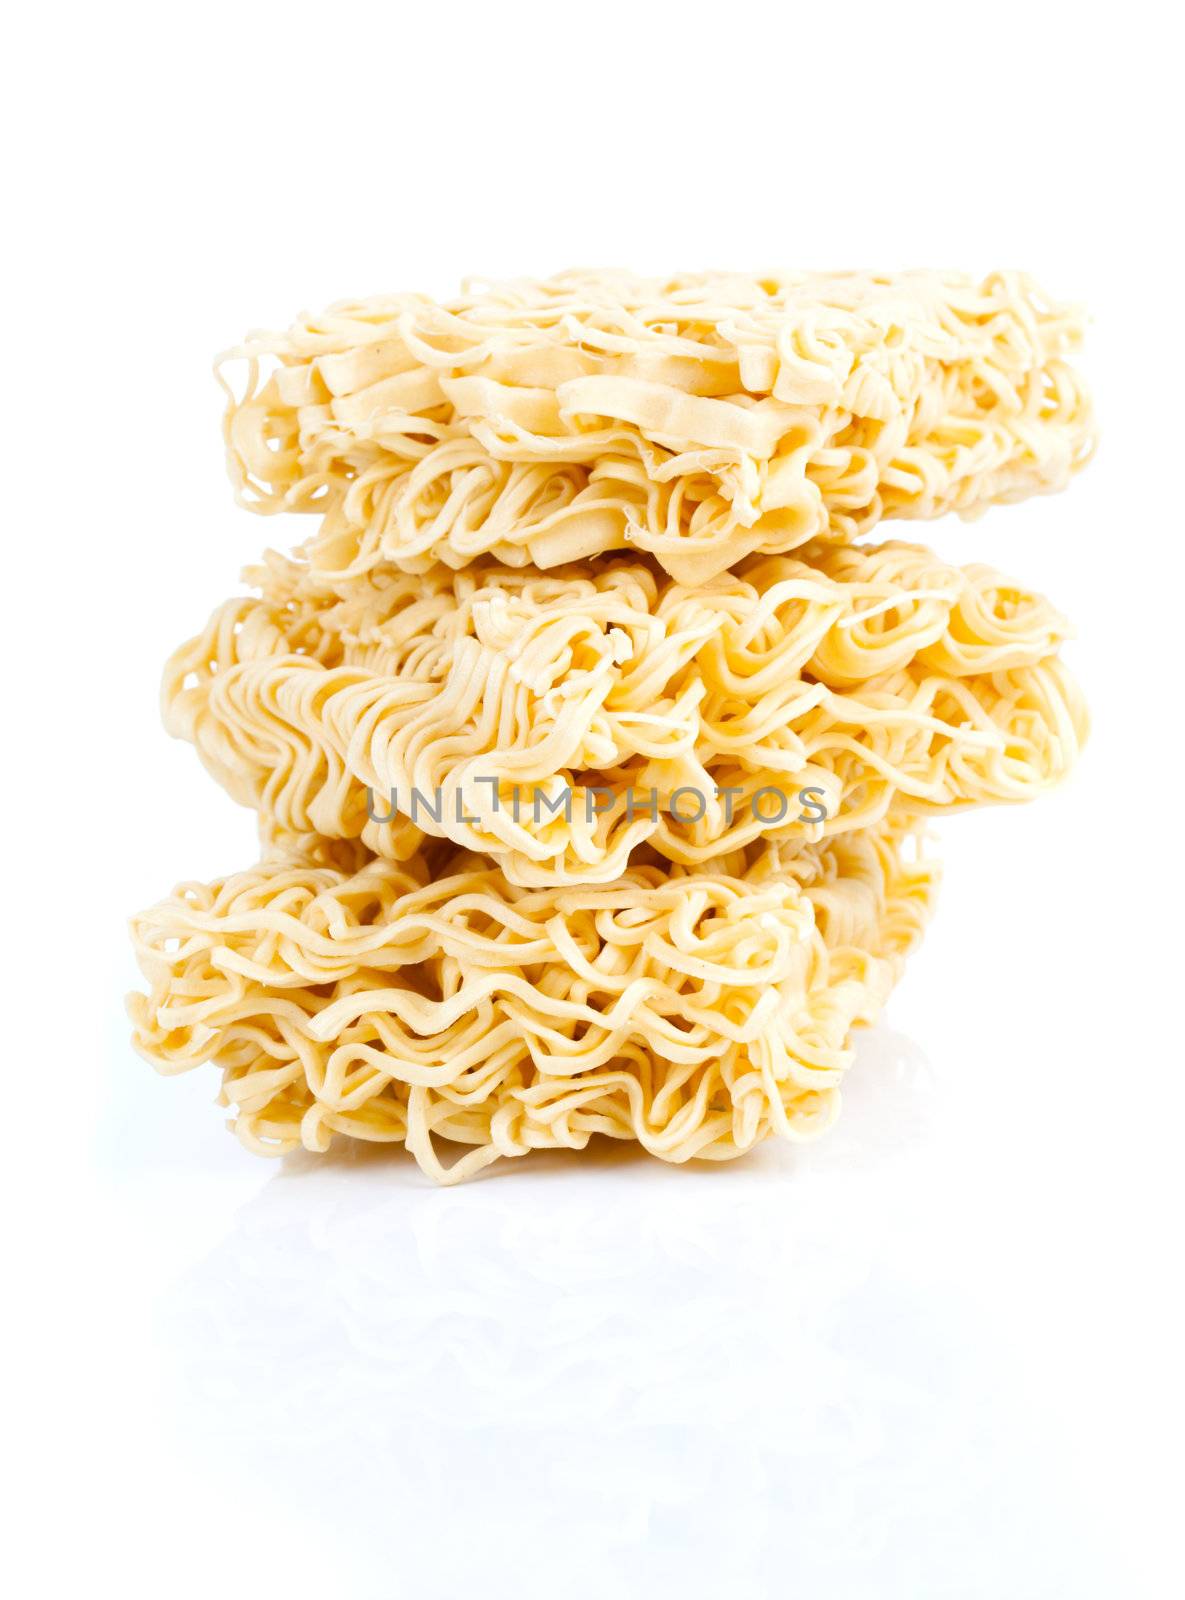 asian ramen instant noodles isolated on white background by motorolka